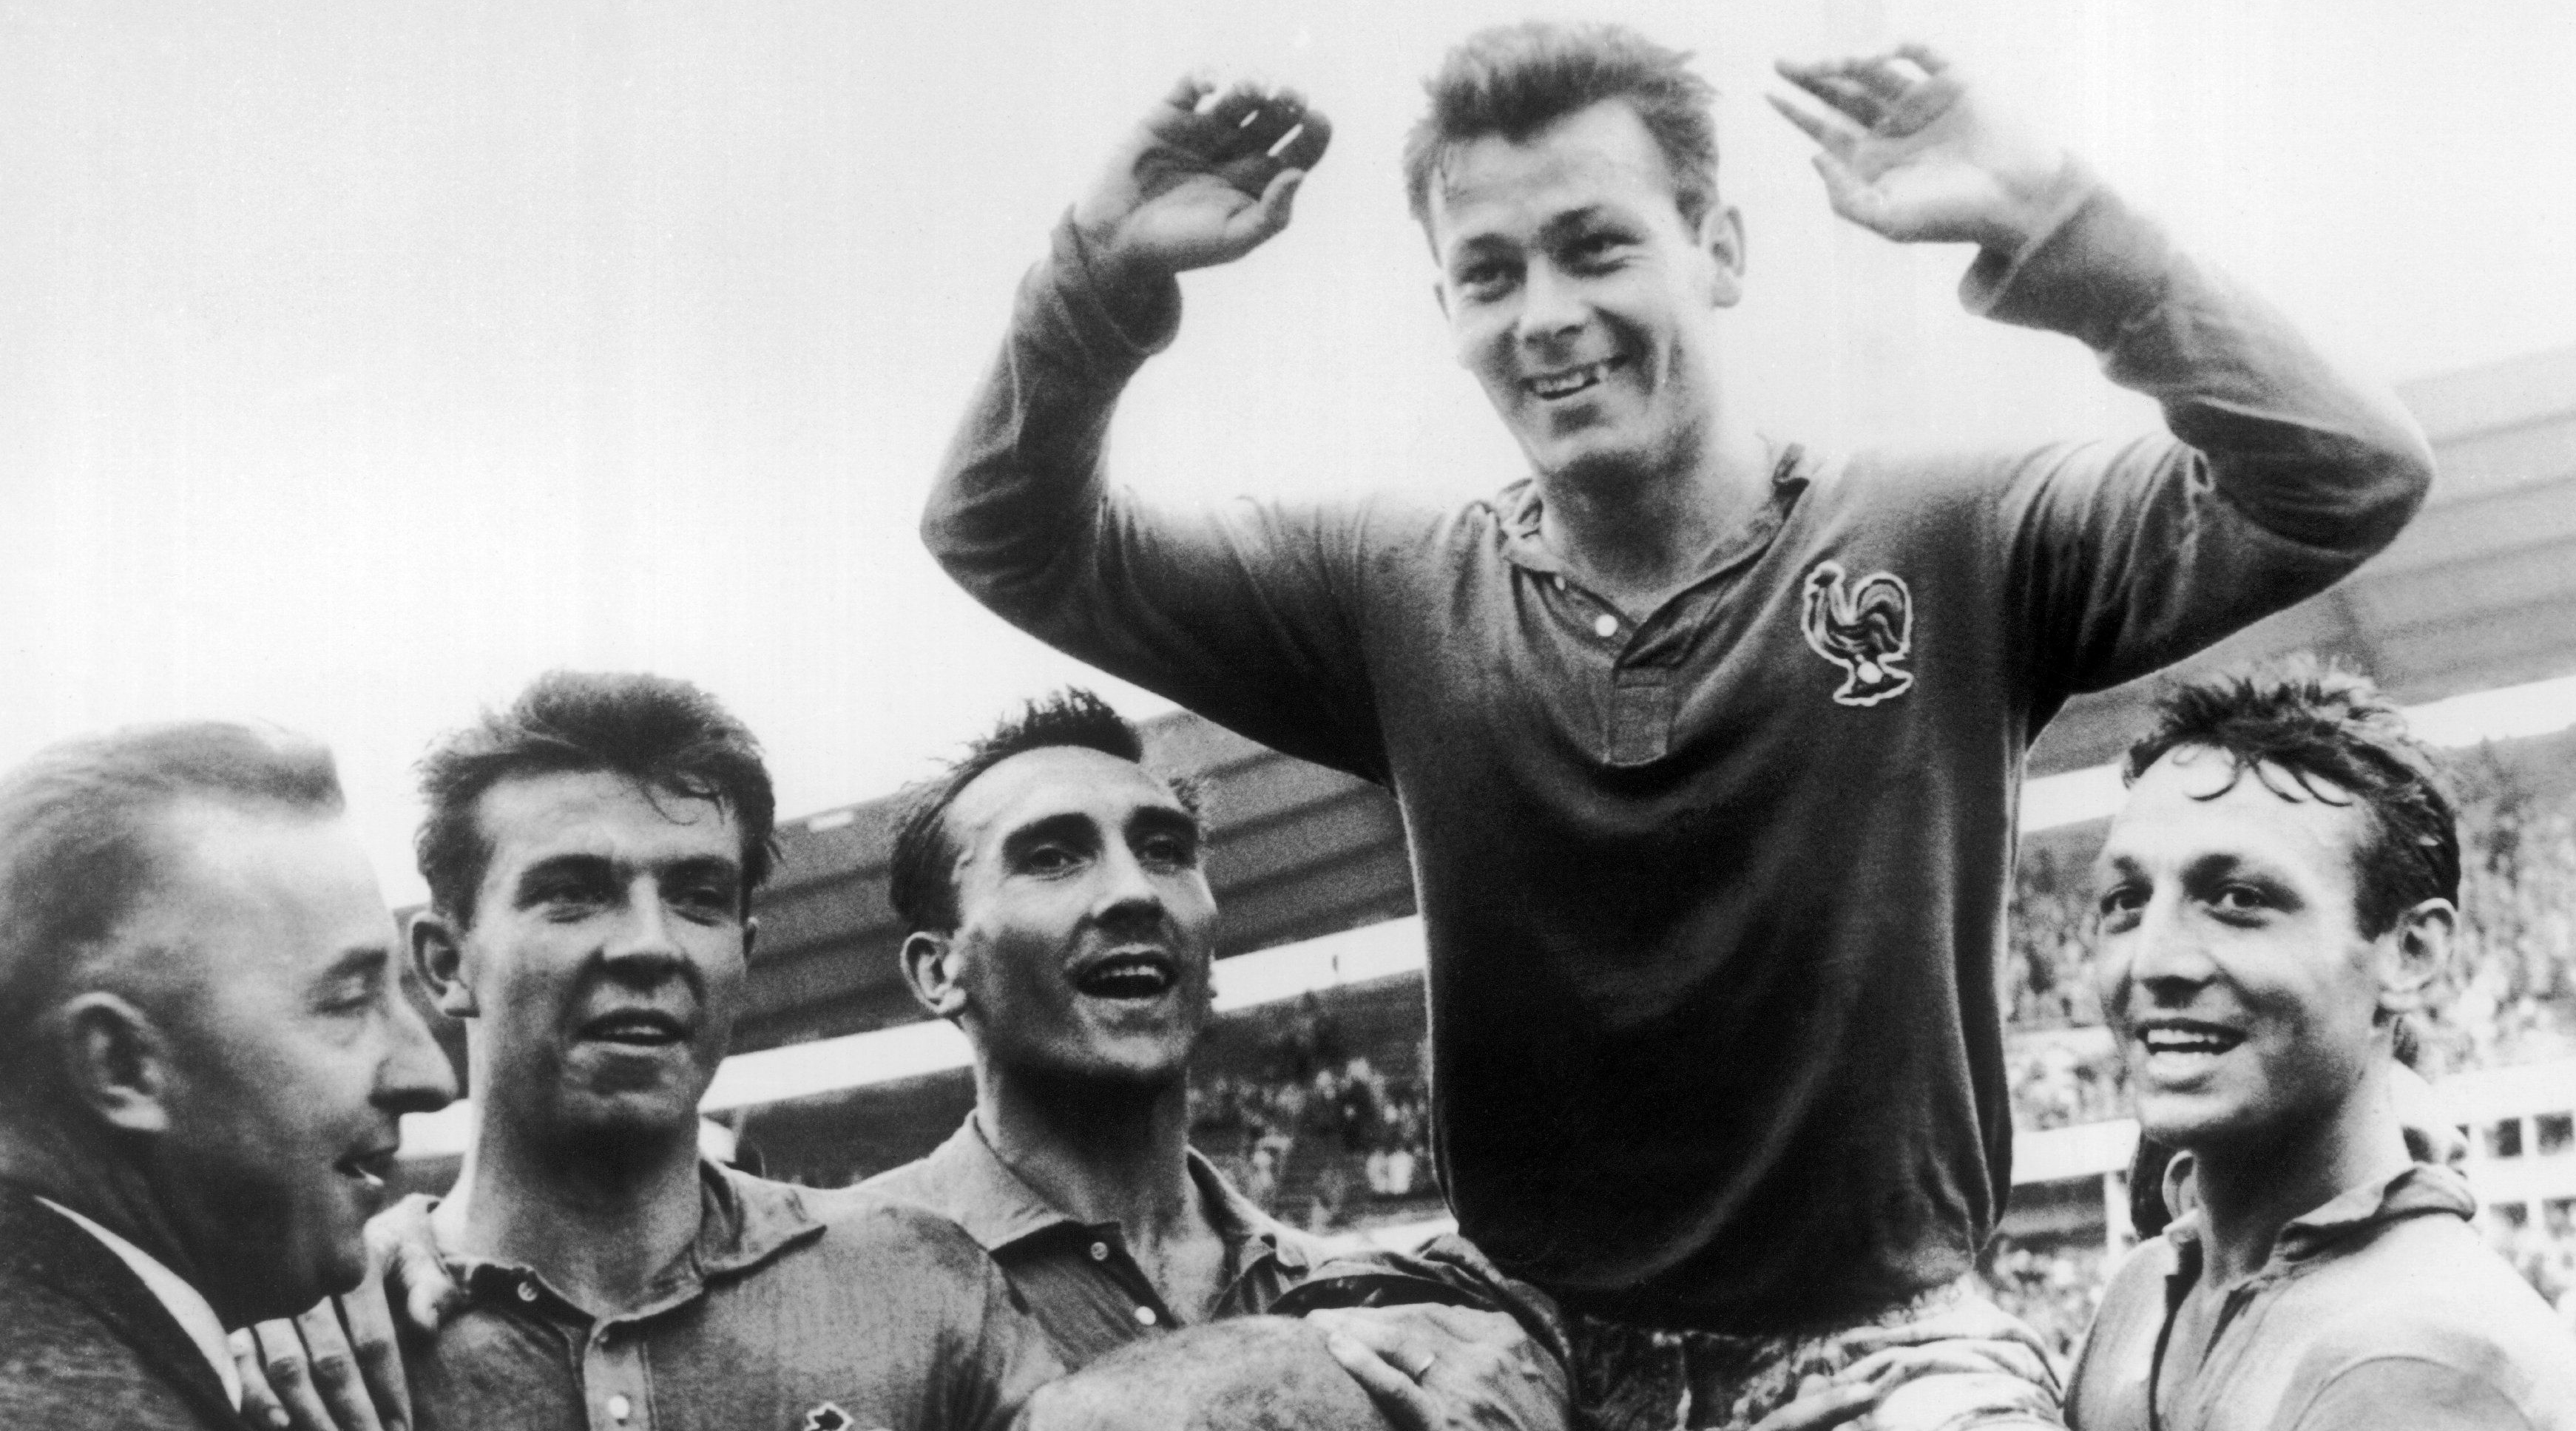 SWEDEN - JUNE 29: The French player Just FONTAINE who scored 13 goals is held in triumph by his team mates. From left to right : DOUIS, Andre LEROND, Just FONTAINE and Jean VINCENT. France was in the third rank in the World Cup that took place in Stockholm. (Photo by Keystone-France/Gamma-Keystone via Getty Images)